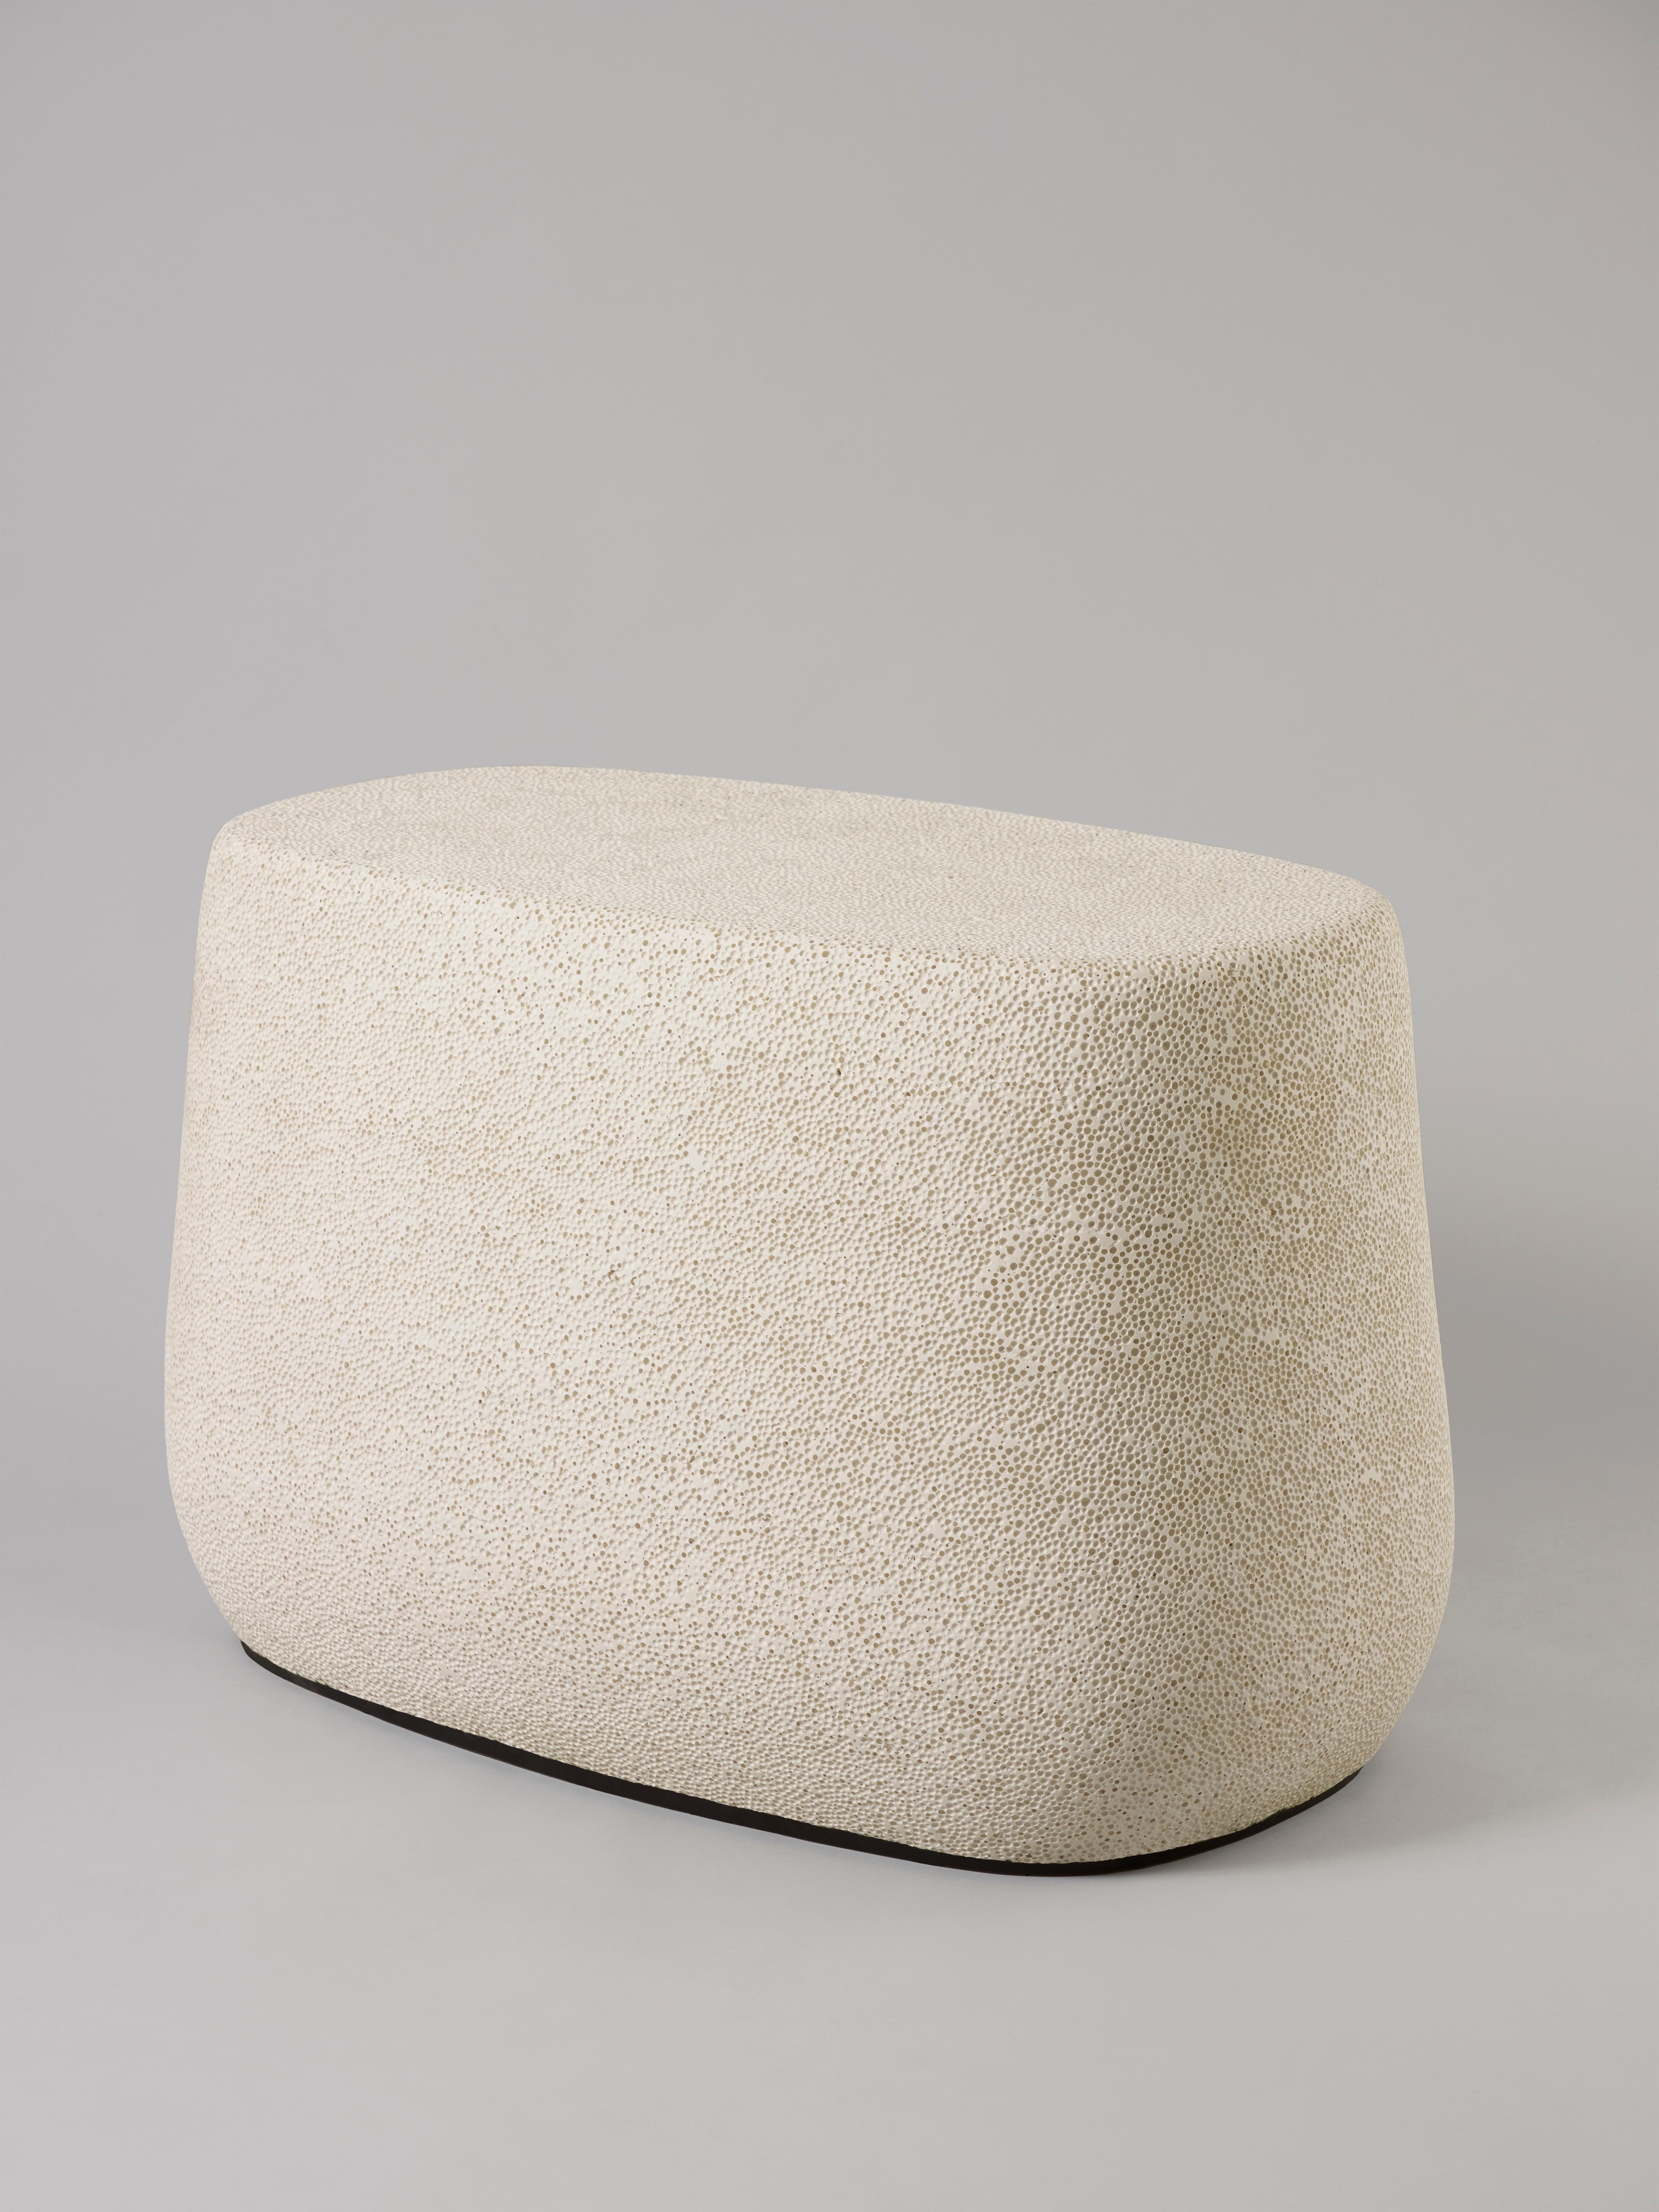 Evoking a beehive or or an intriguing mineral like pumice stone, this ‘Lightweight Porcelain’ bench is part of Djim Berger’s ‘Lightweight Porcelain’ collection exclusively produced for Galerie BSL since 2010. Djim Berger is a graduate of the